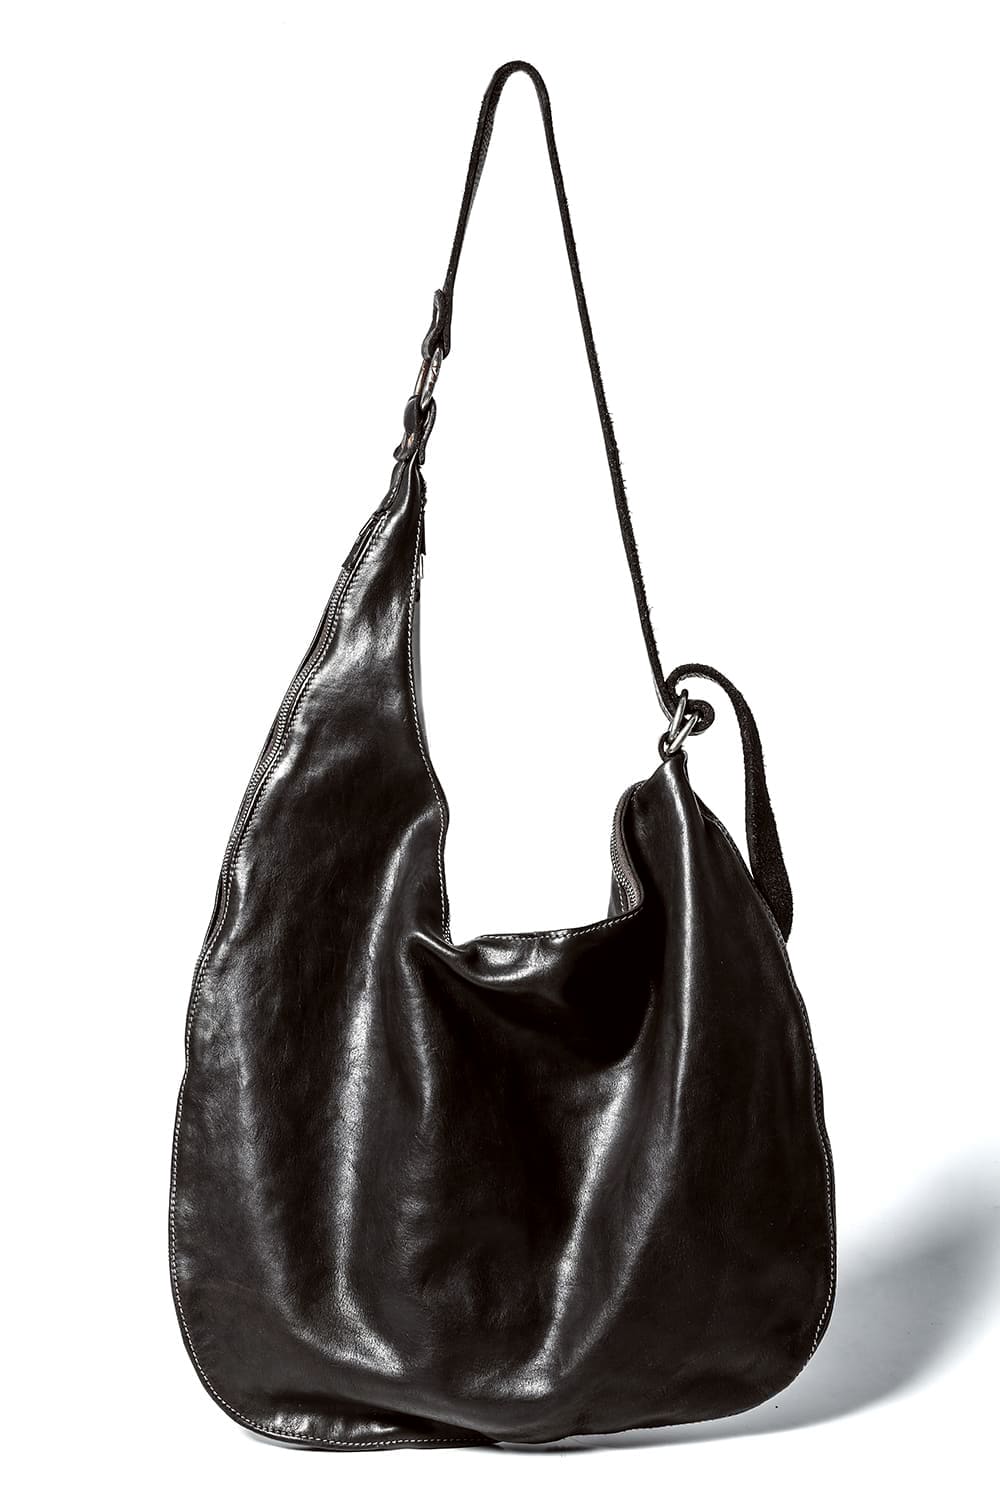 Guidi - Bags - Online Store - FASCINATE THE R OSAKA